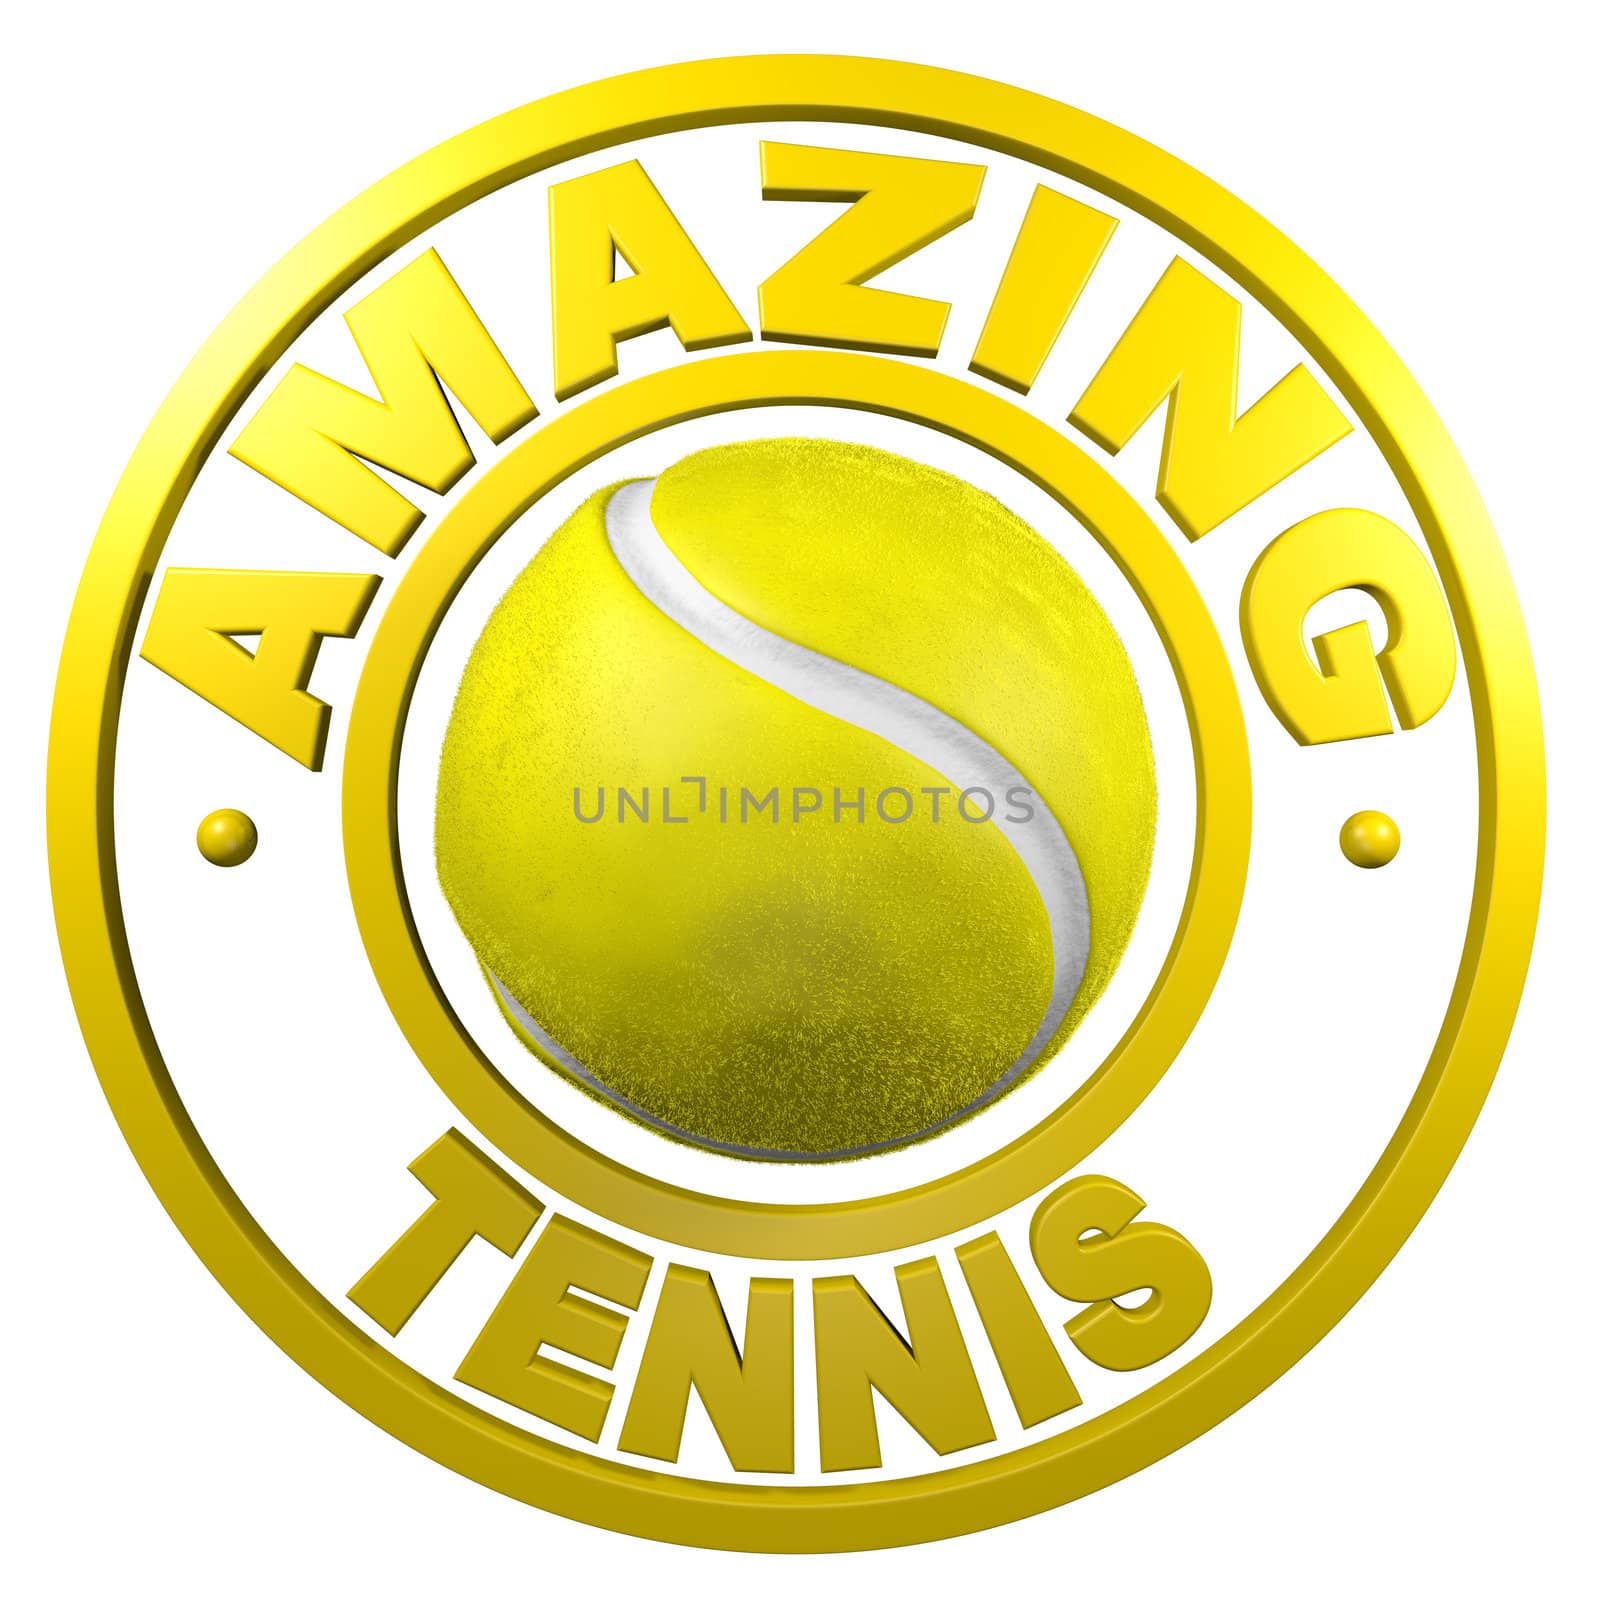 Amazing Tennis circular design with a white background